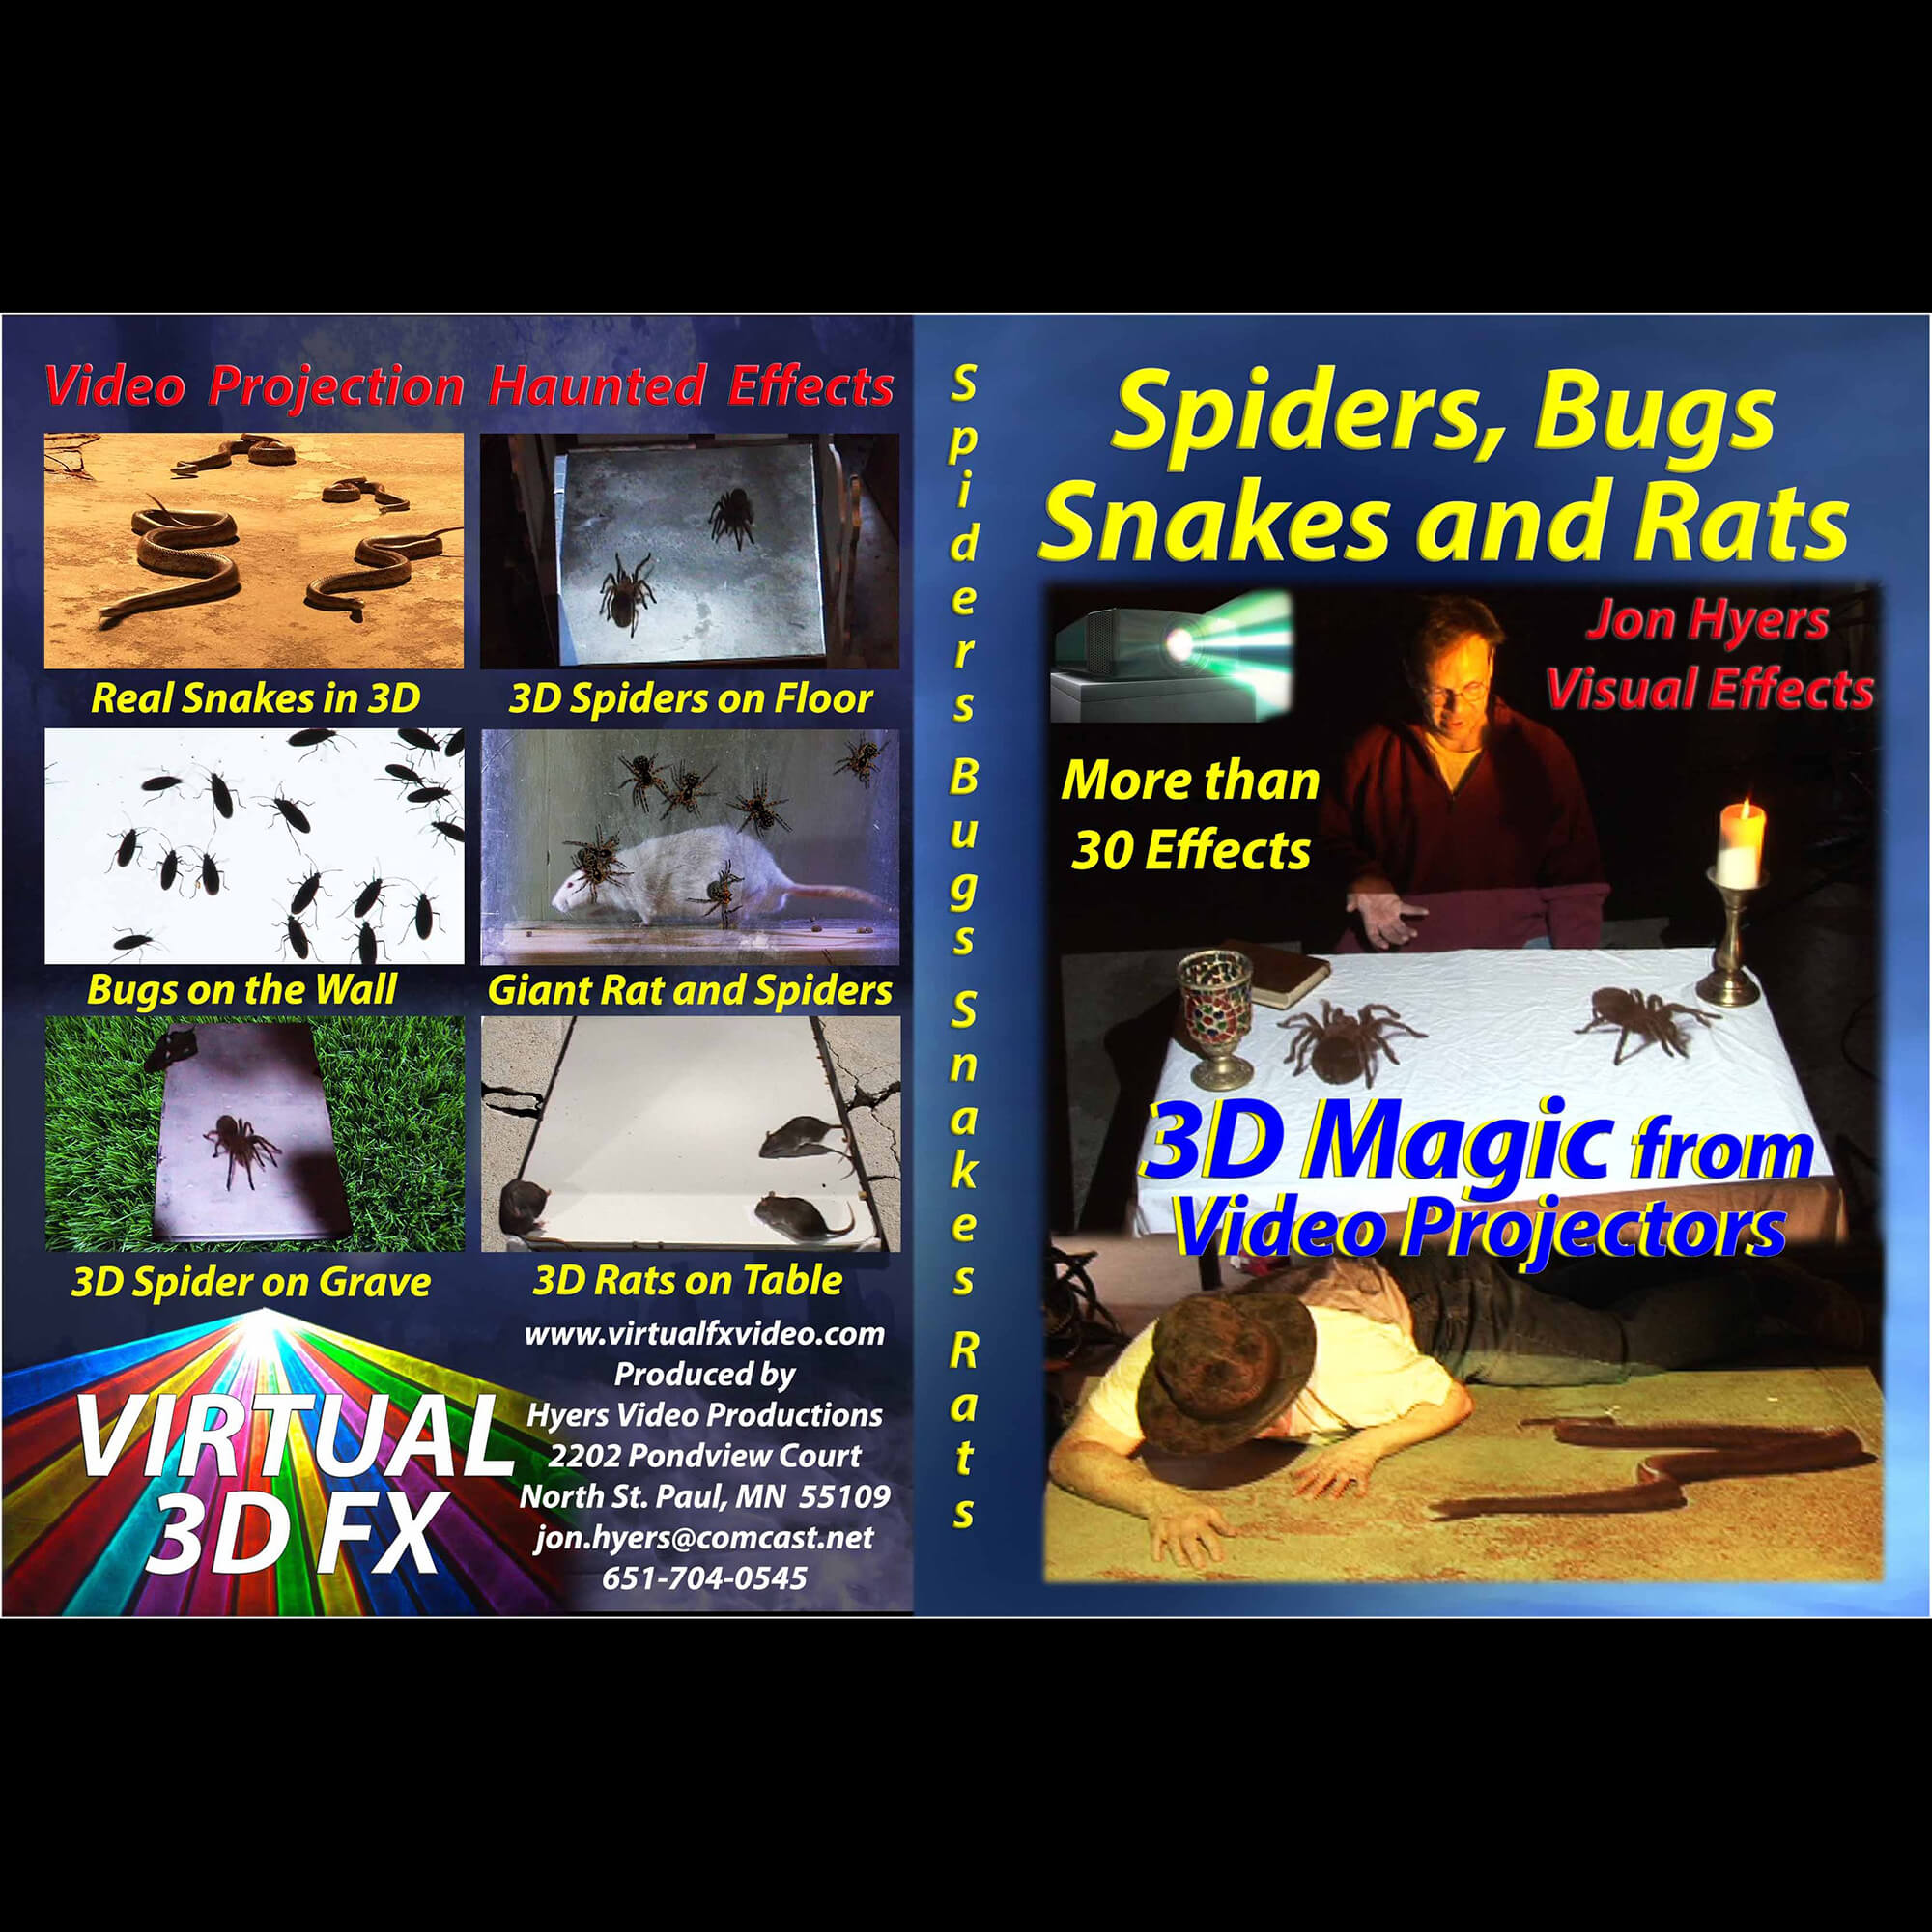 Spiders, Bugs, Snakes & Rats DVD w/ Digital Files Coupon